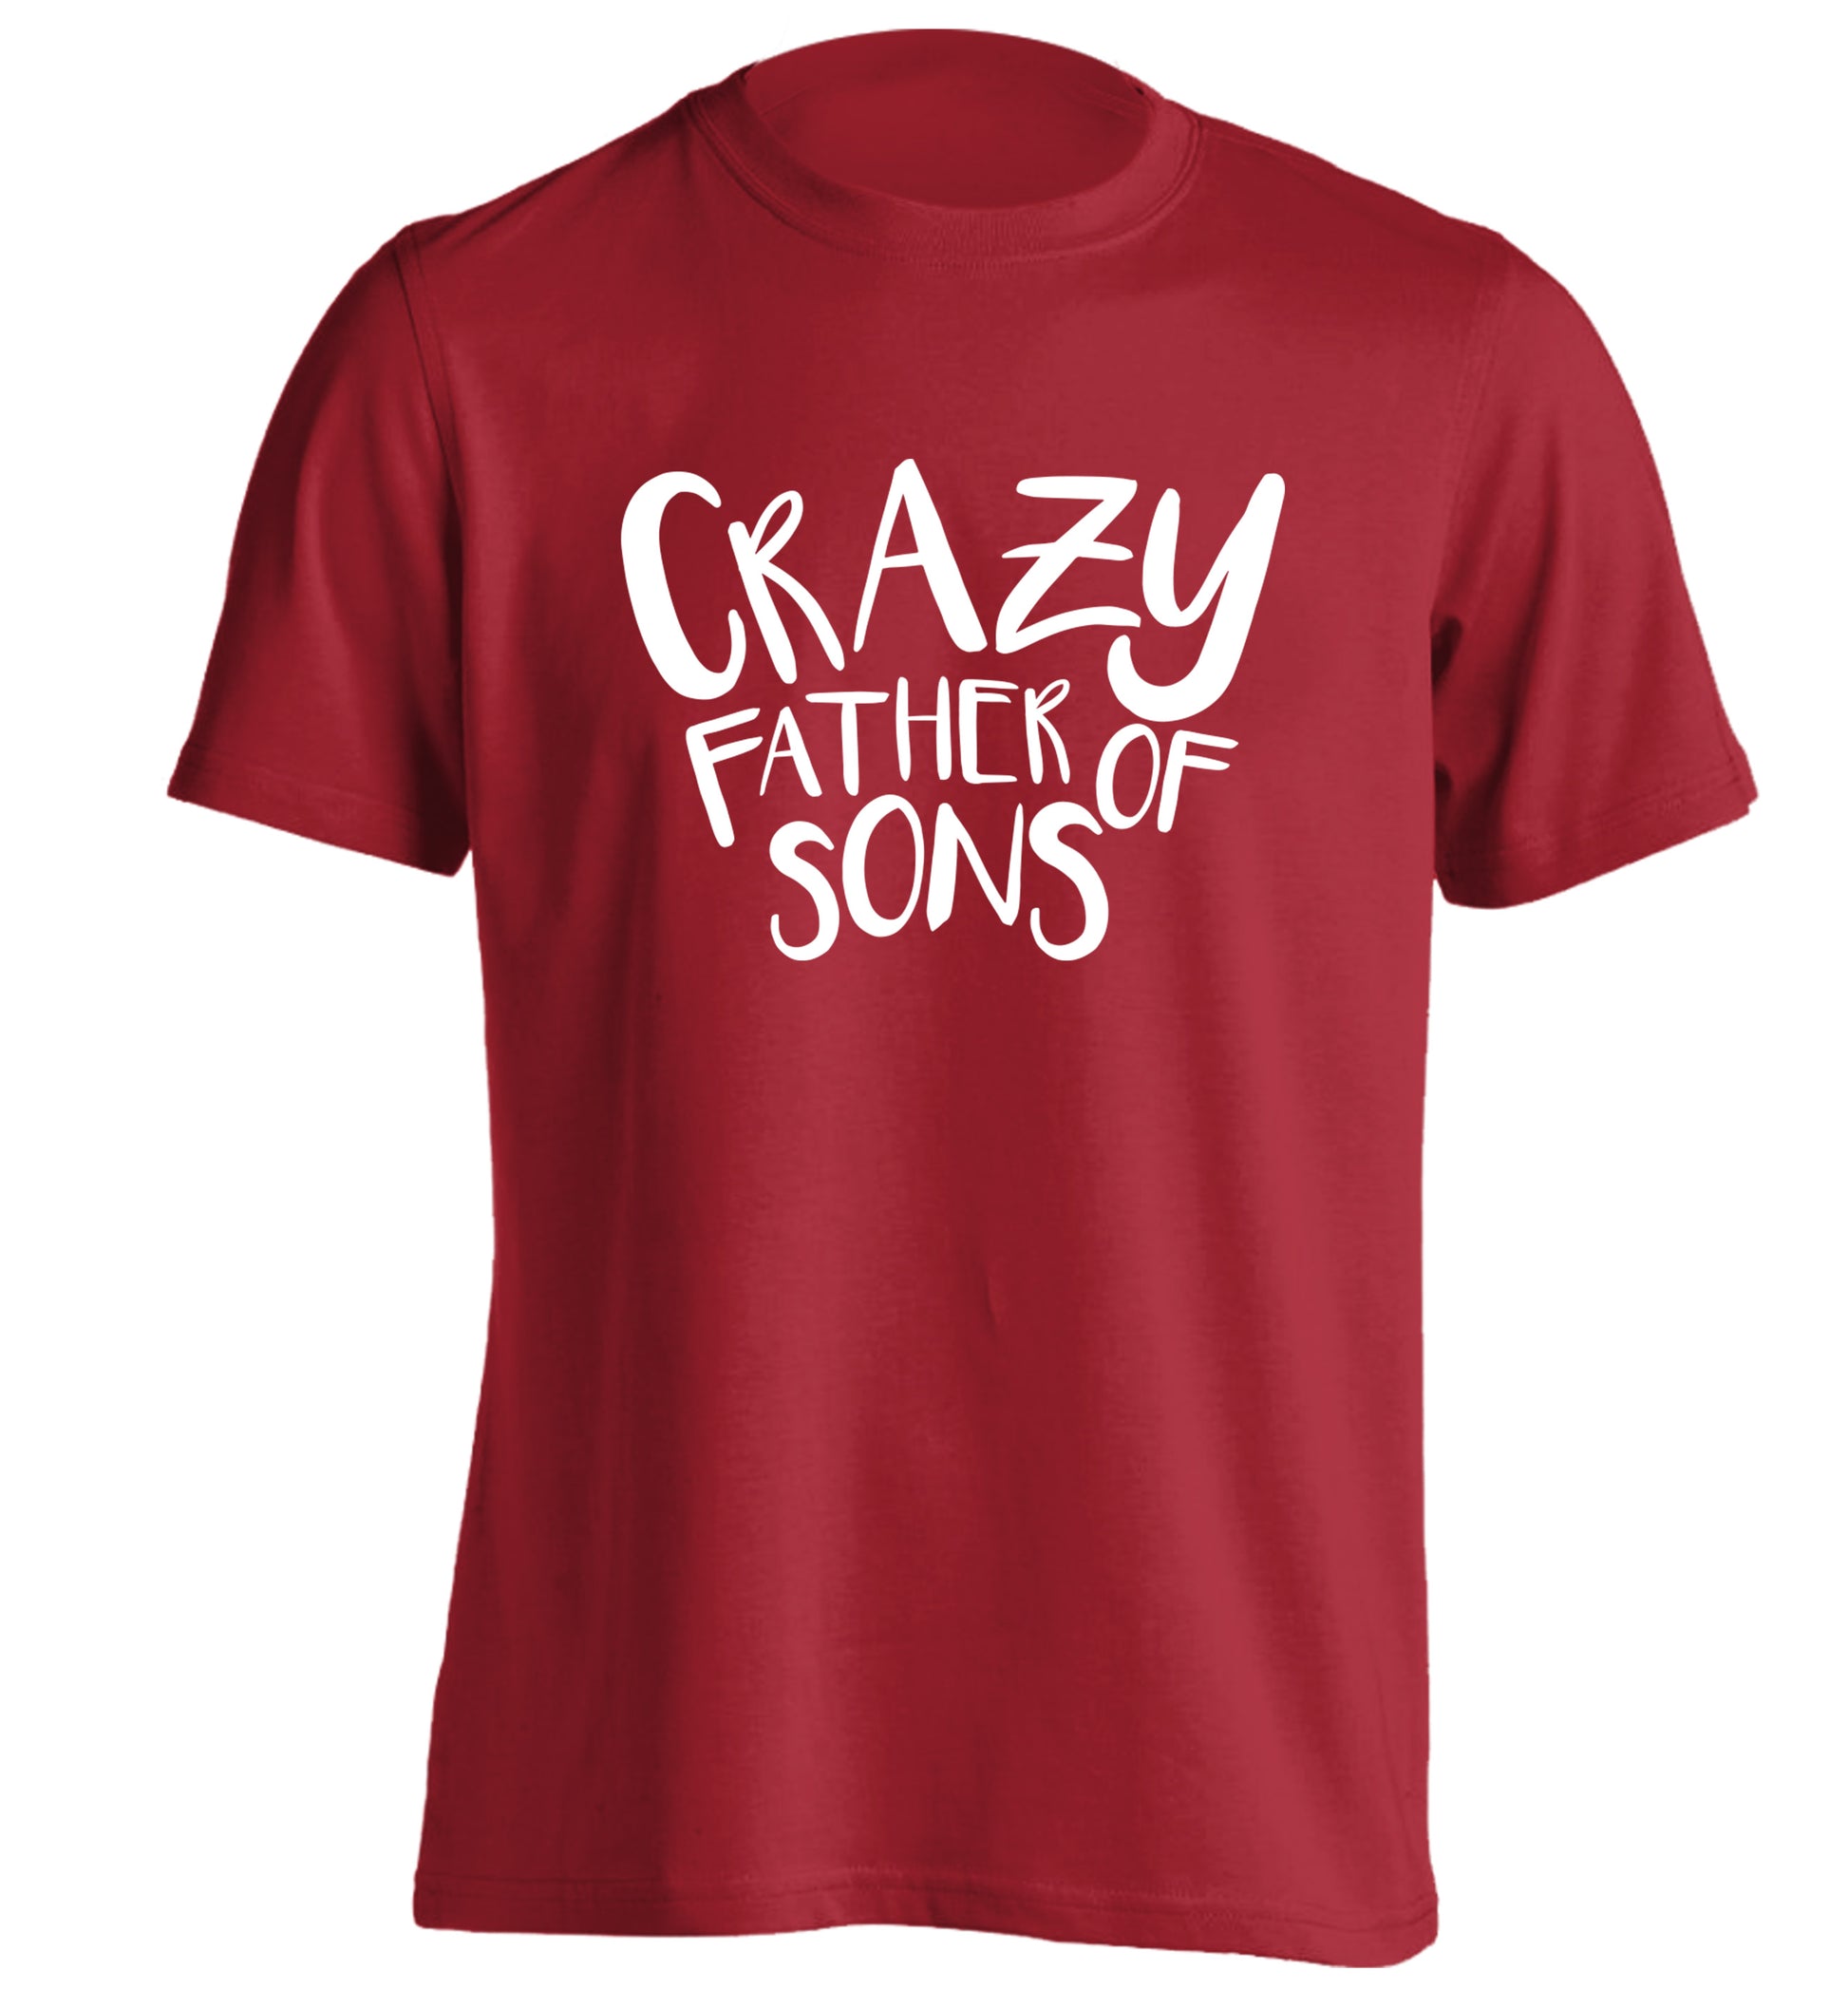 Crazy father of sons adults unisex red Tshirt 2XL